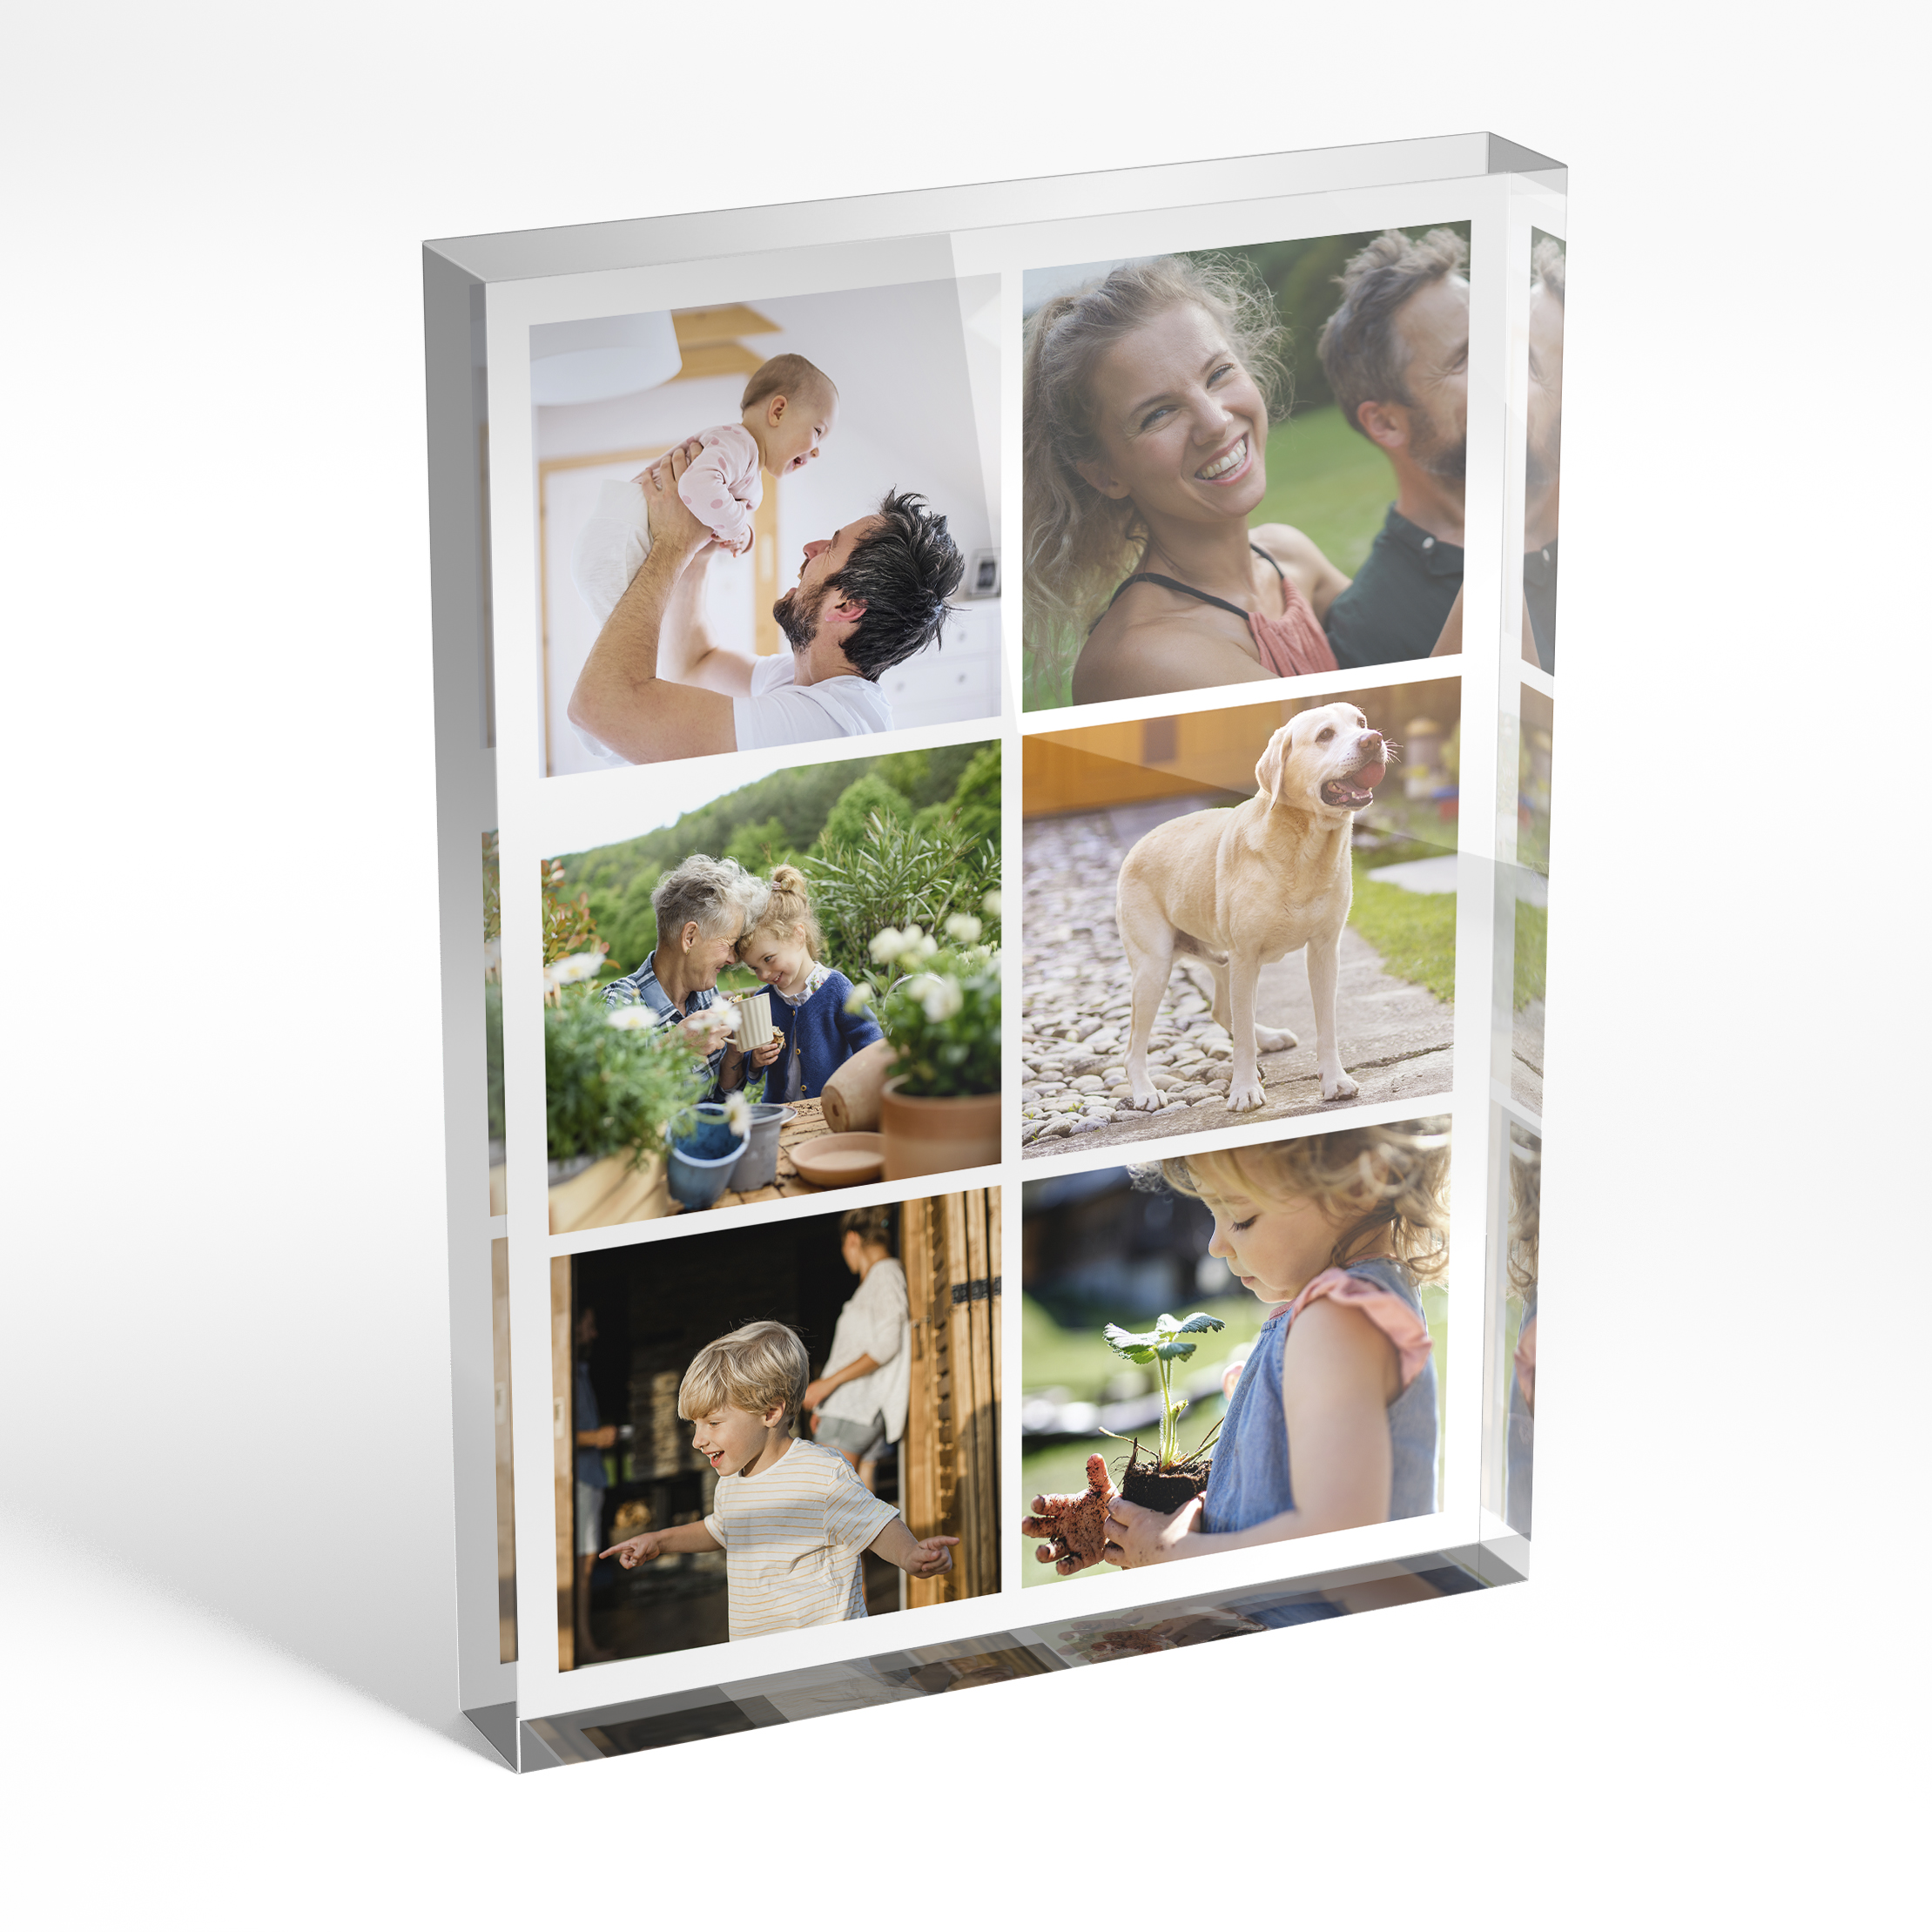 An angled side view of a portrait layout Acrylic Photo Block with space for 6 photos. Thiis design is named "Friends Collage". 